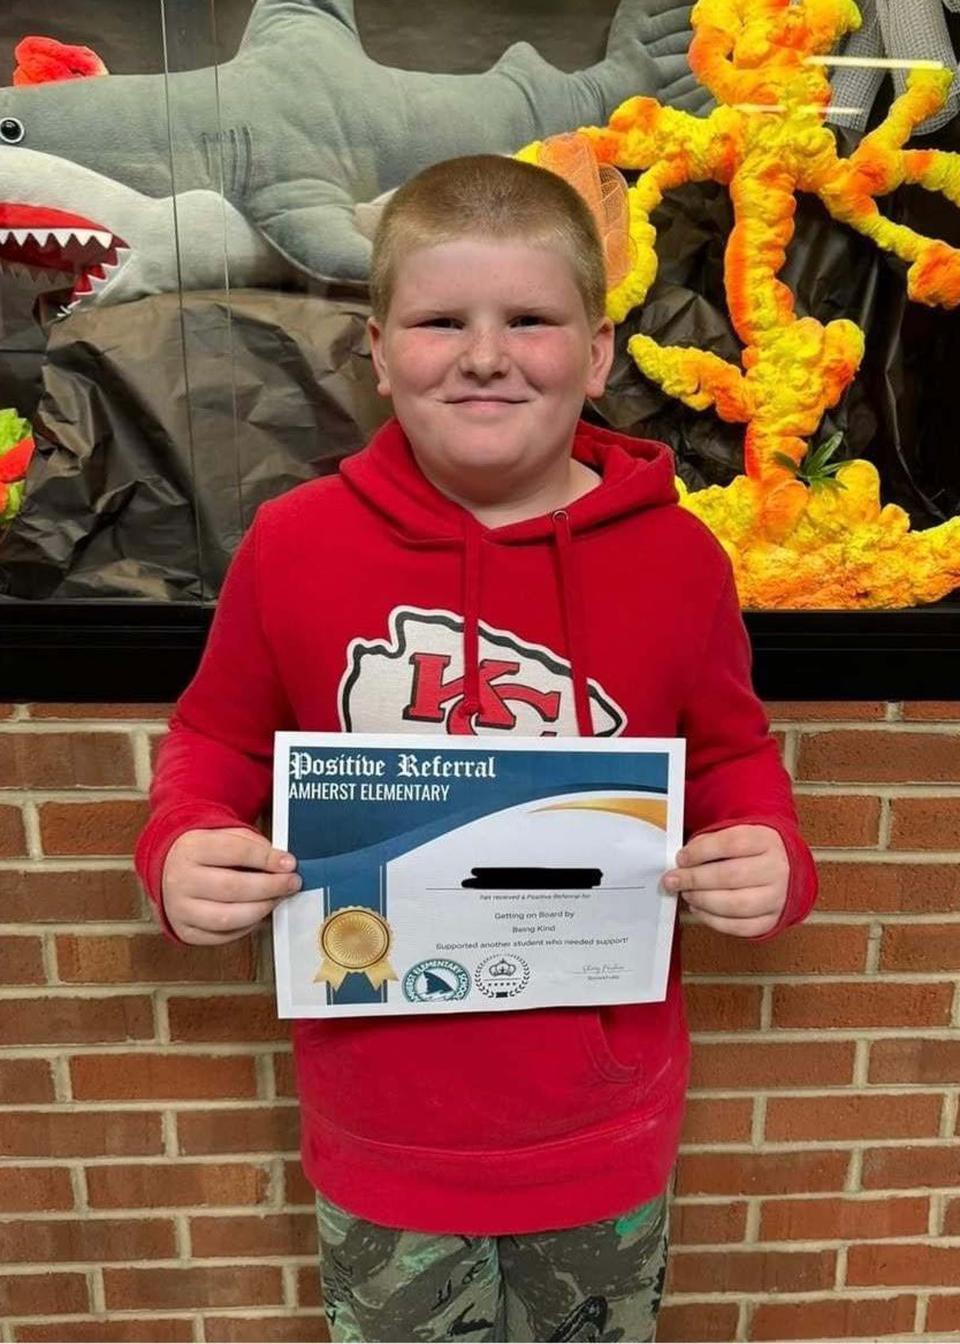 Lennon Kennedy earned a positive referral from Amherst Elementary School for being kind and working well with others. Dec. 2023.